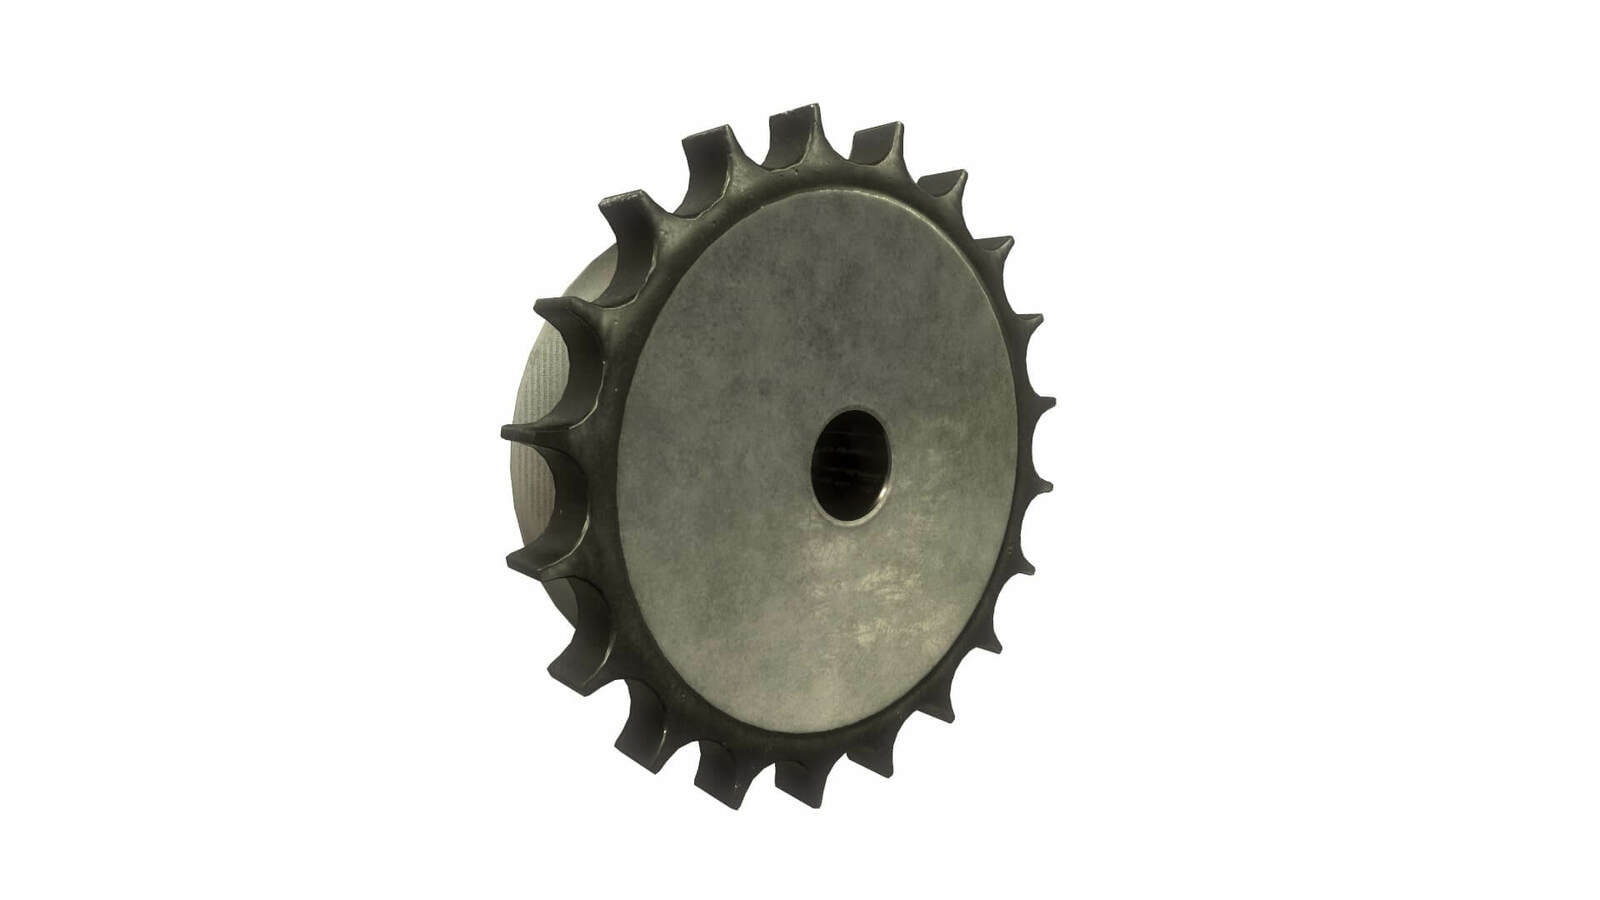 15 Teeth Bored to Size Sprockets: 1 Bore 133582 50 Chain Size 3.32 Outer Diameter Hardened Teeth Black Oxide Finish 